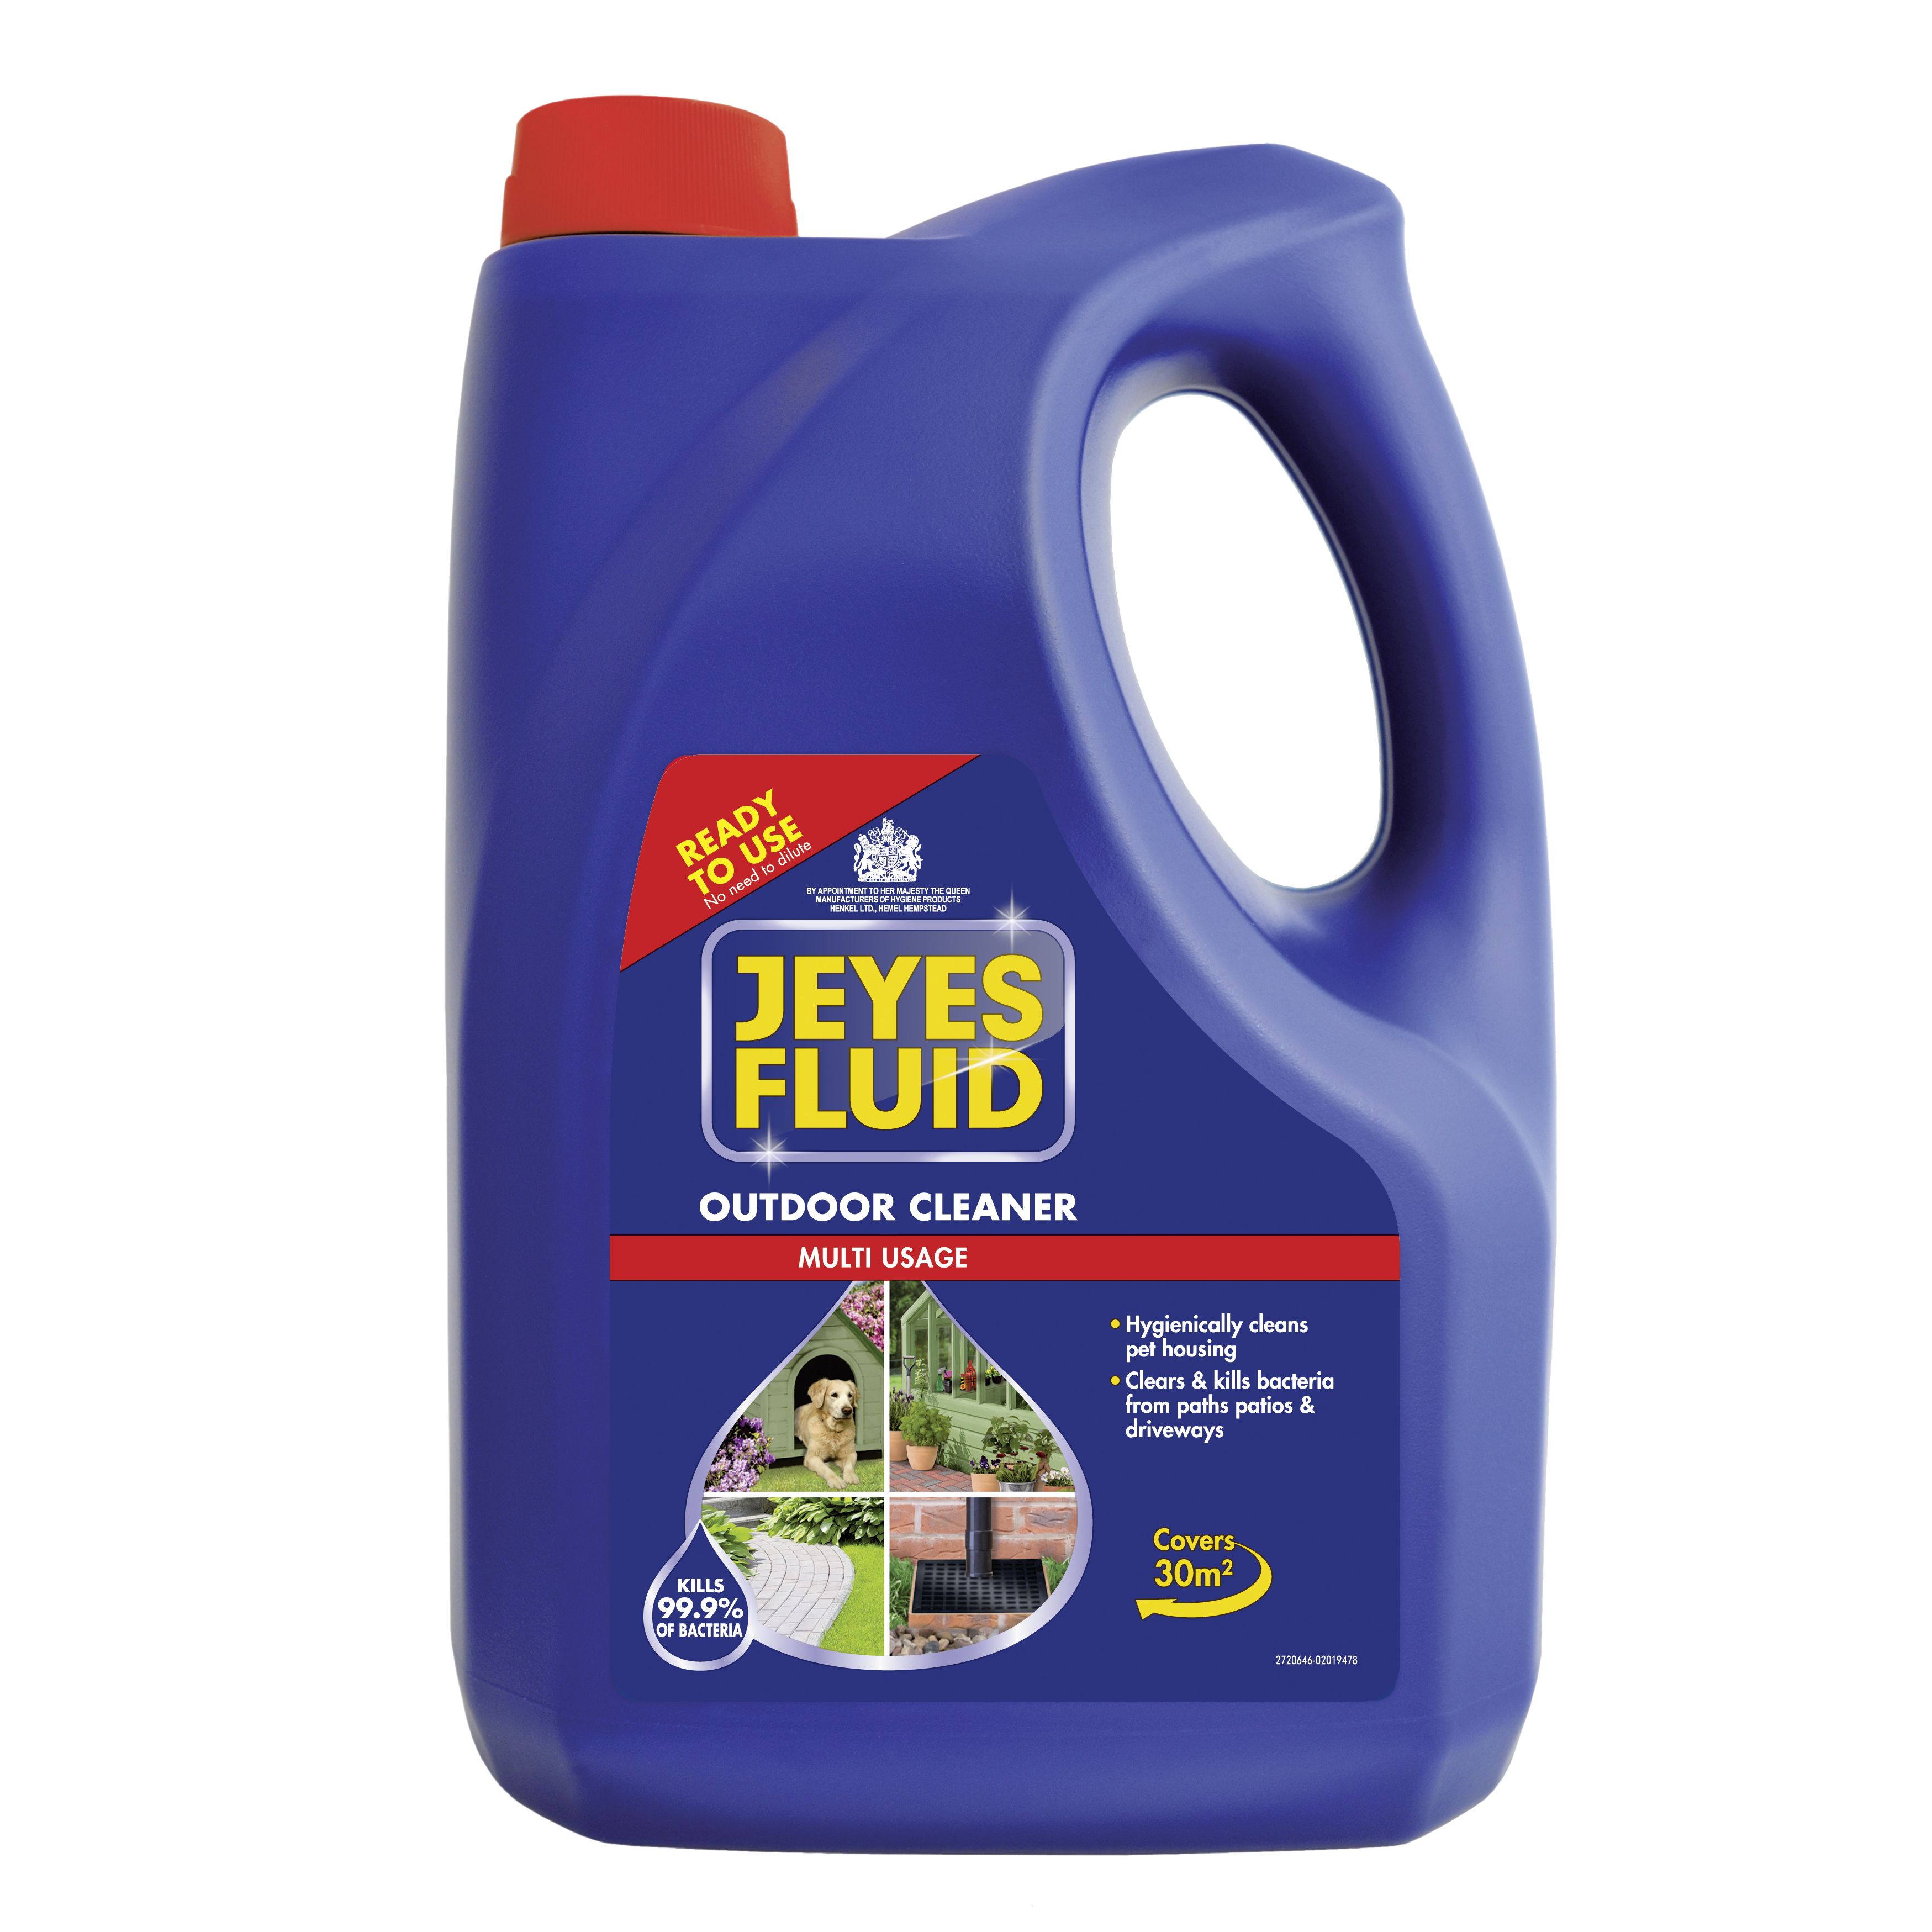 https://kingfisher.scene7.com/is/image/Kingfisher/jeyes-fluid-unfragranced-anti-bacterial-disinfectant-4l~5000325051577_01c_bq?$MOB_PREV$&$width=190&$height=190